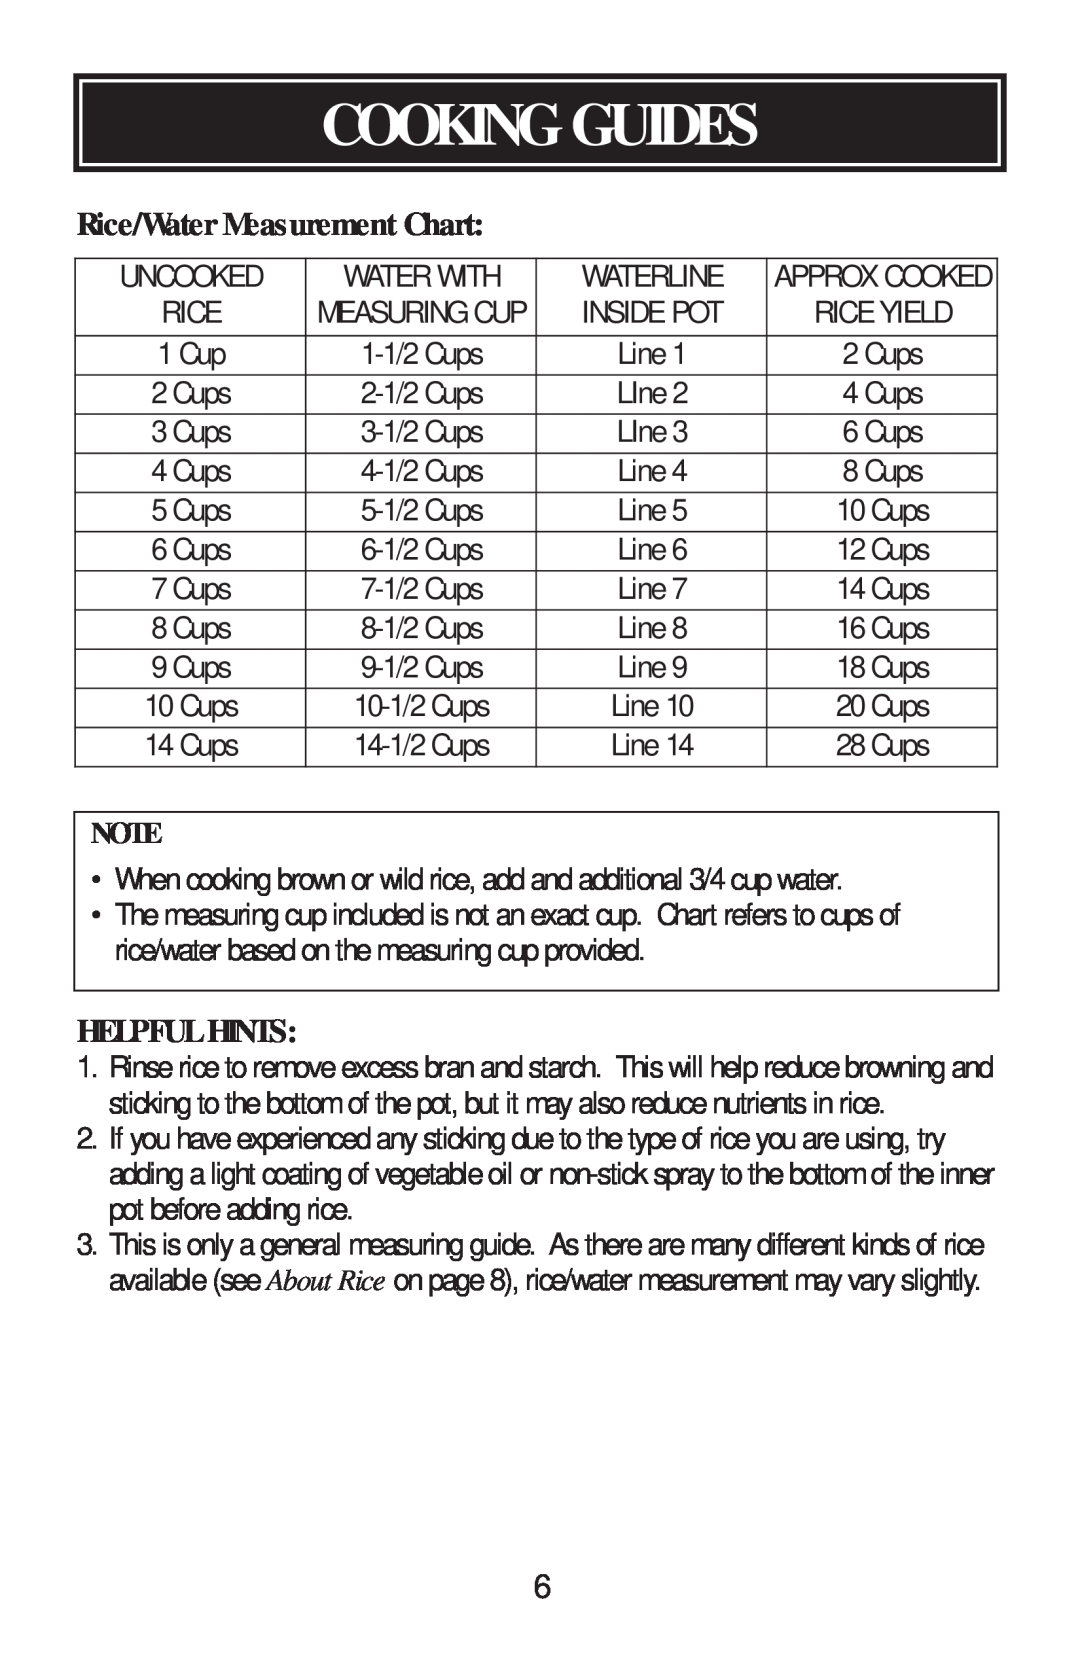 Aroma ARC-700 instruction manual Rice/Water Measurement Chart, Helpful Hints, Cooking Guides 